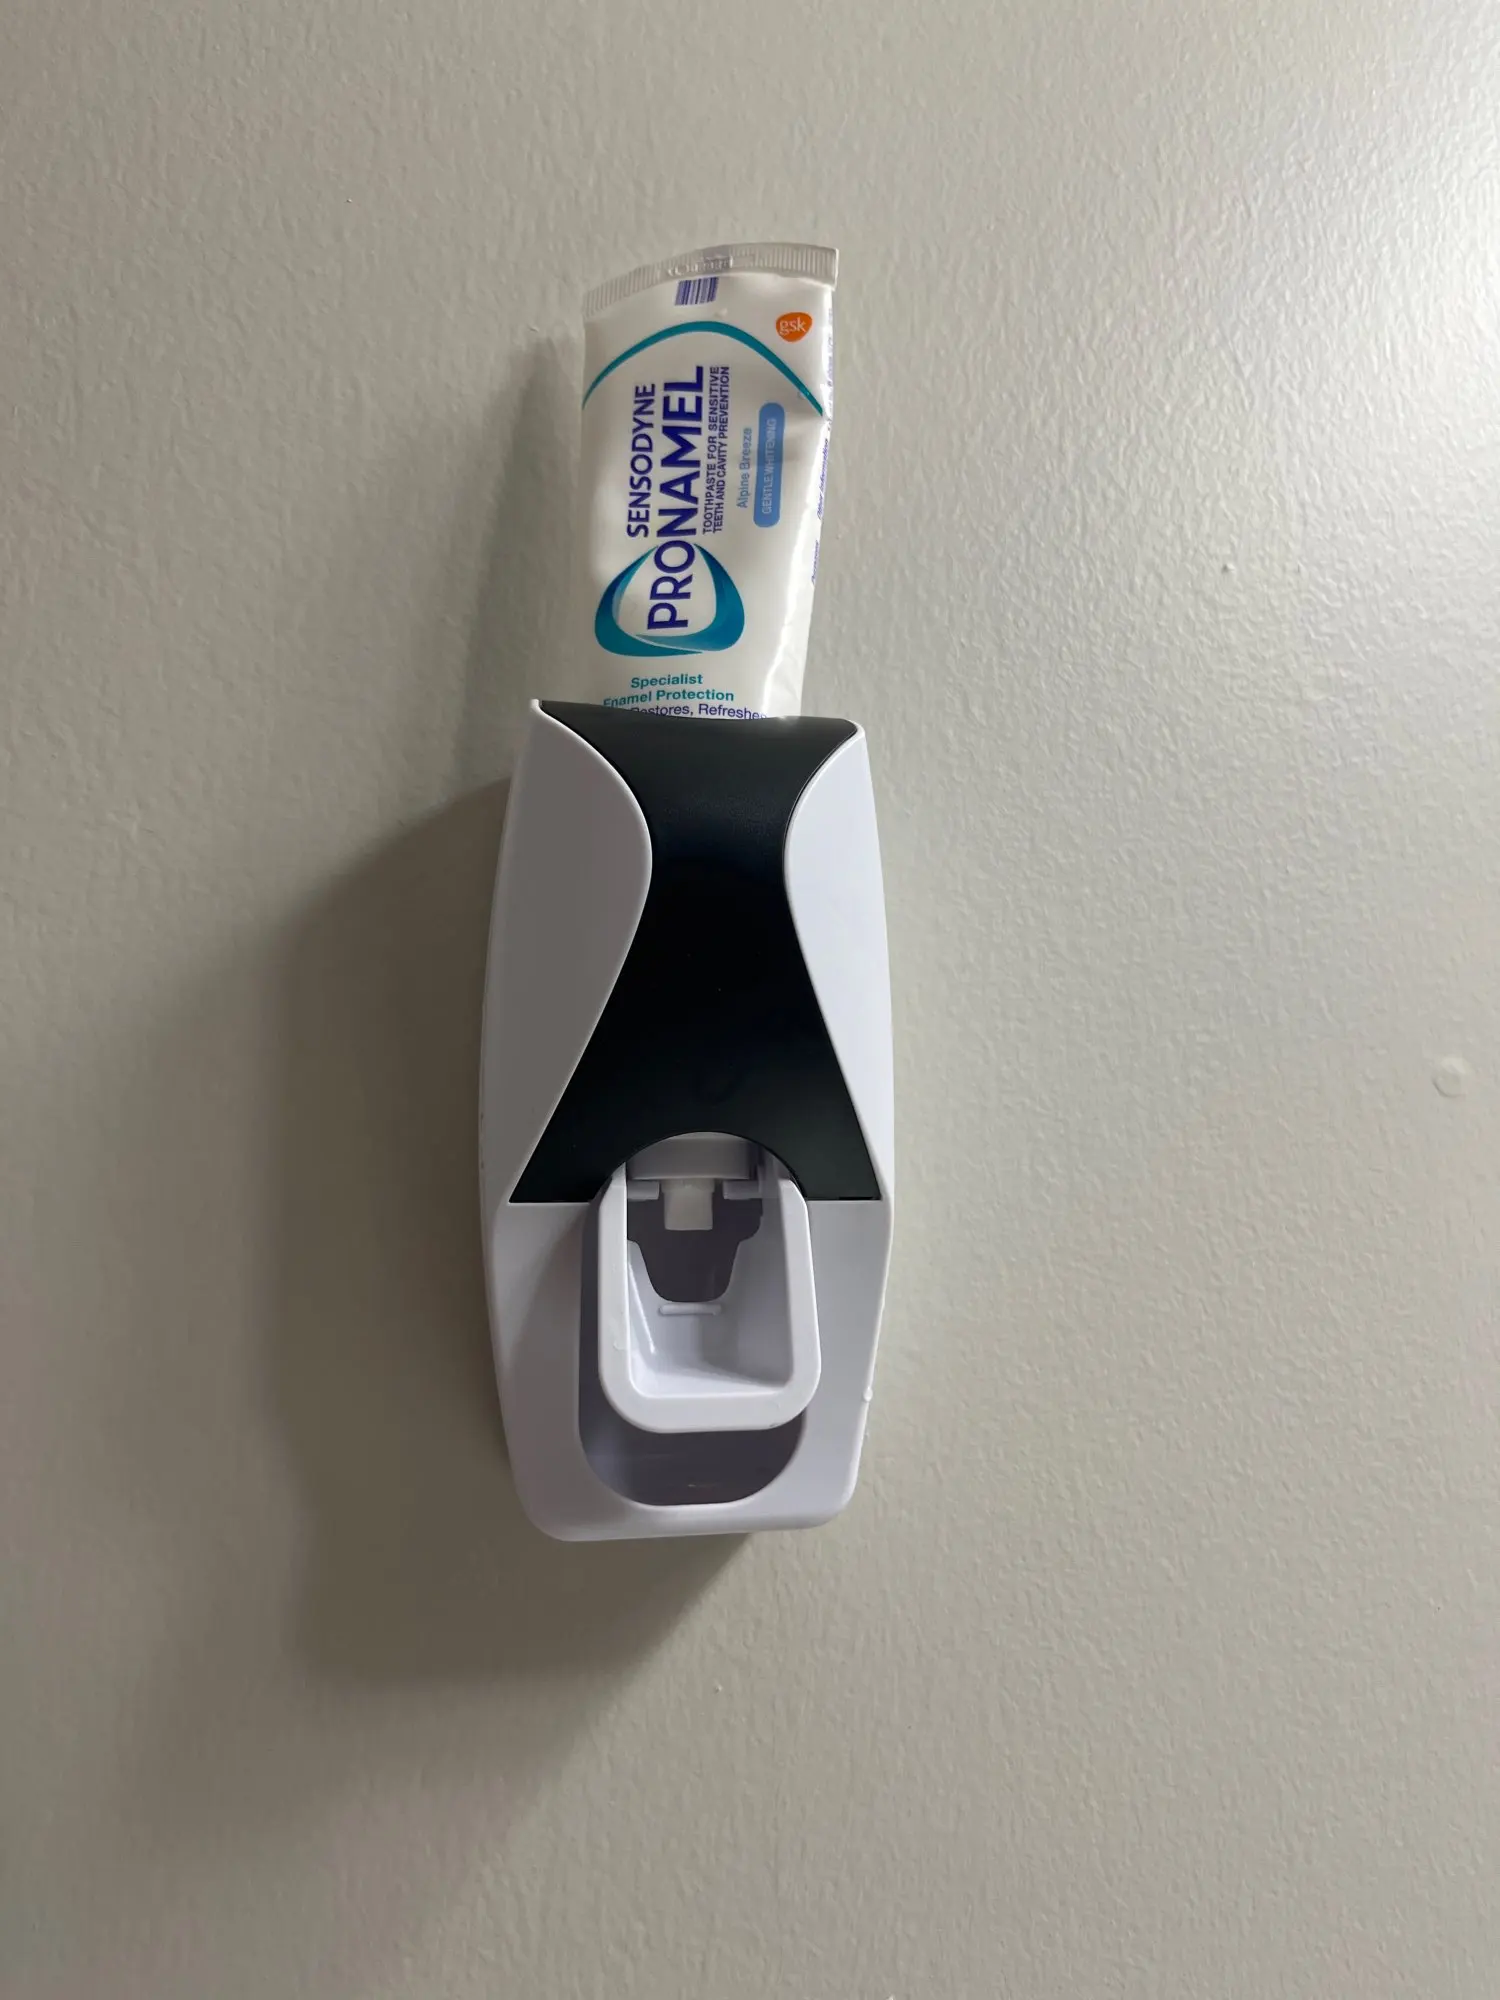 Toothpaste Squeezer Dispenser Automatic Holder photo review